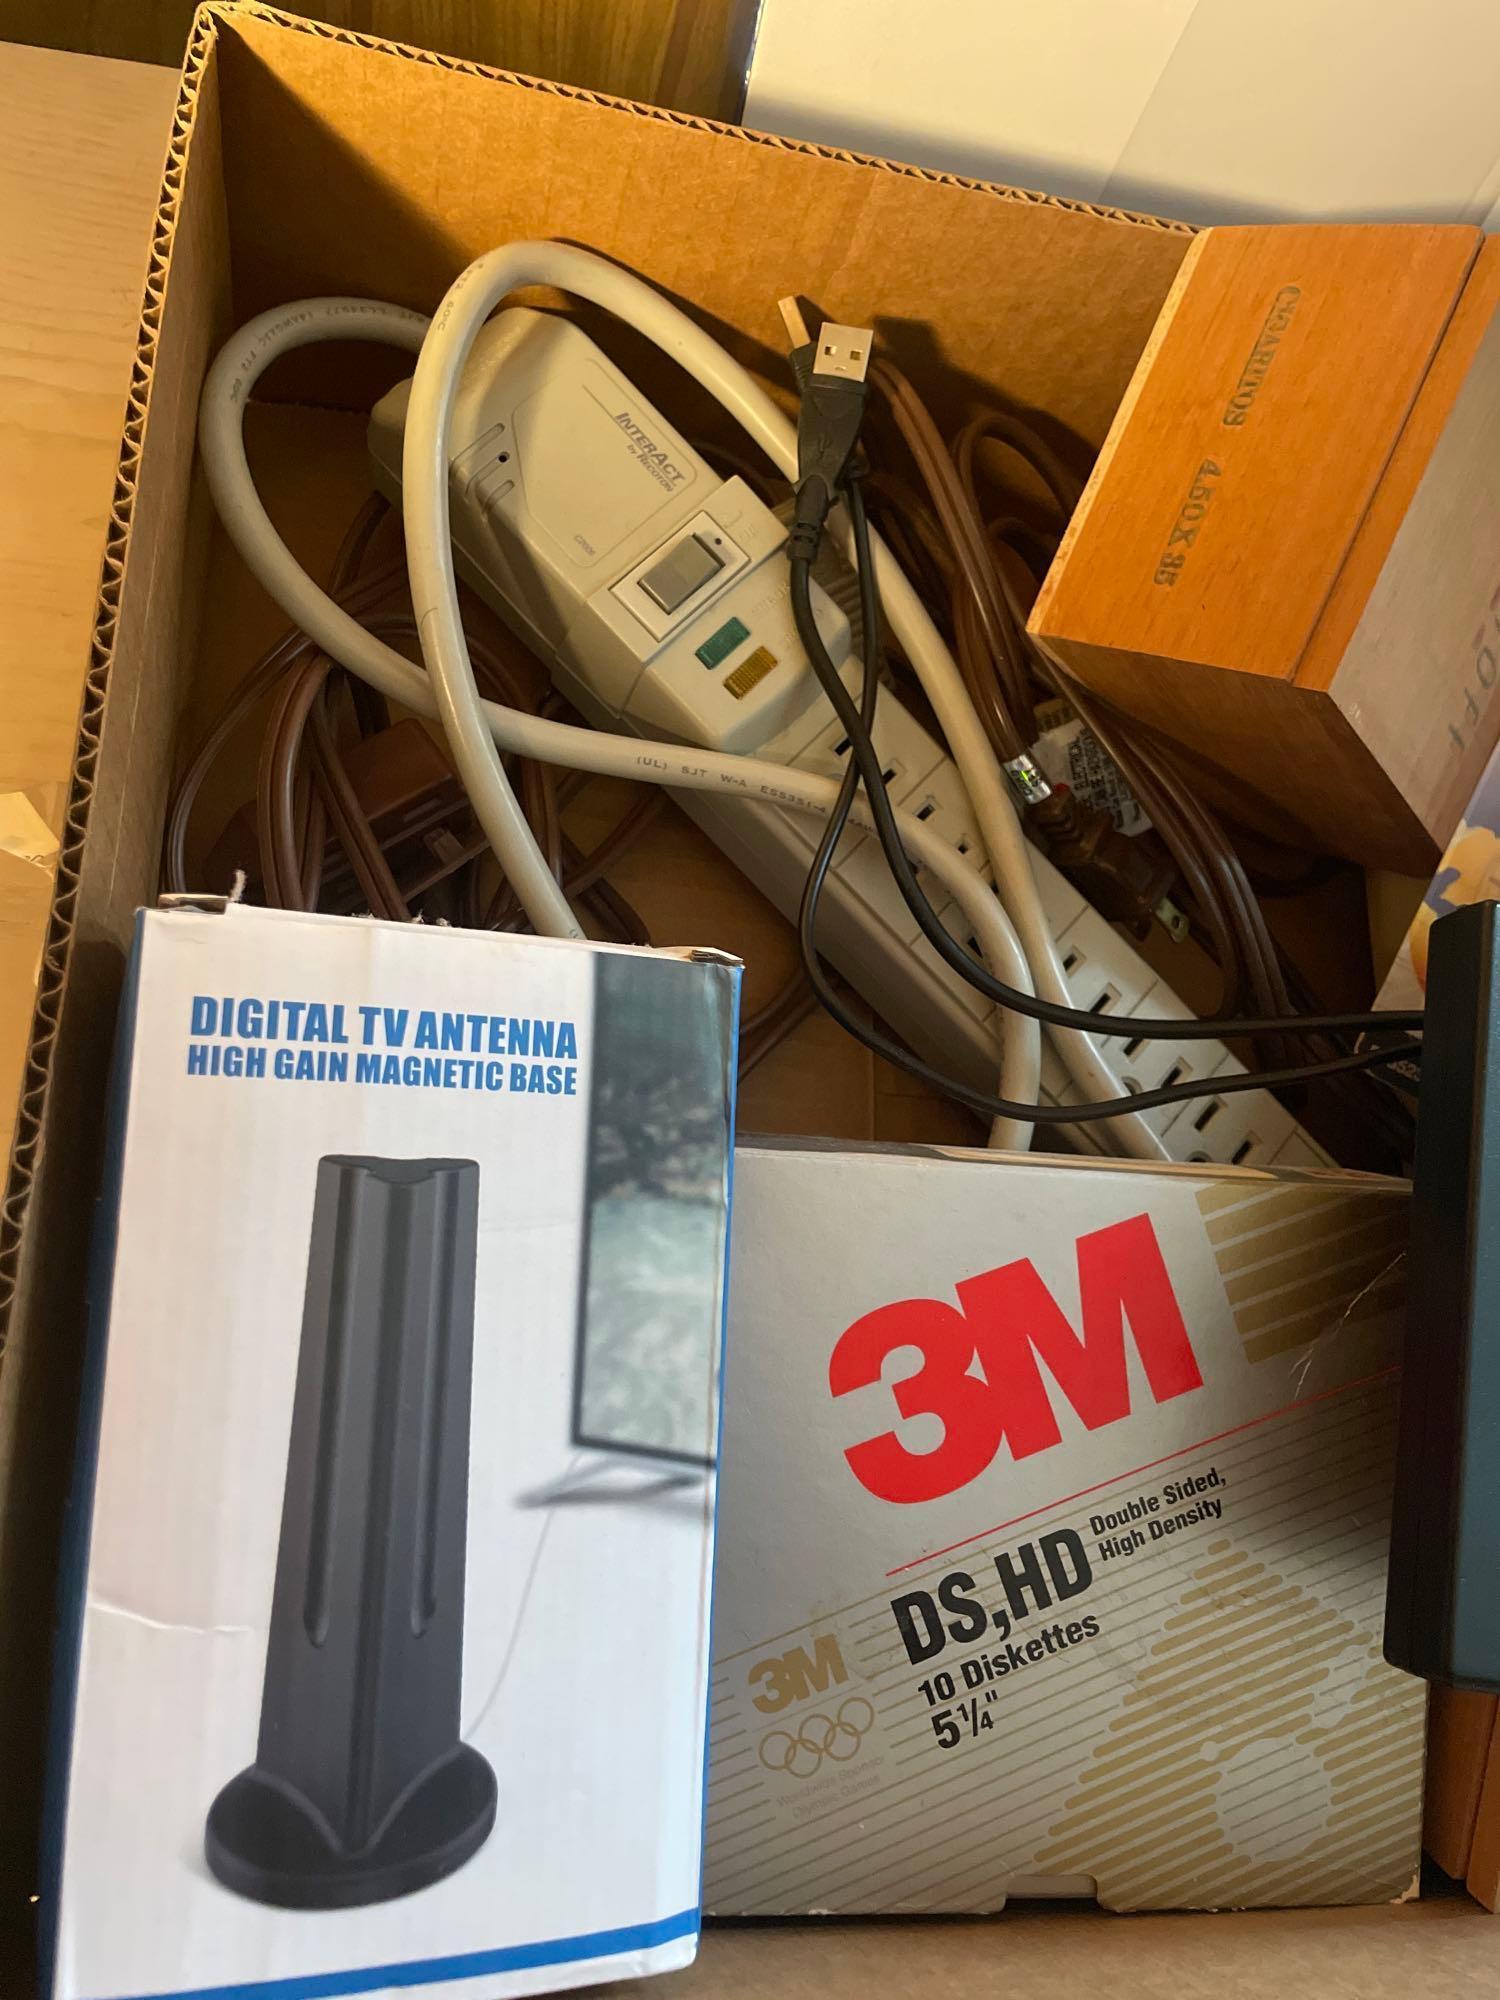 Hard Drive, DVD/CD Drive, Extension Cords, Phone, Antennas and Misc